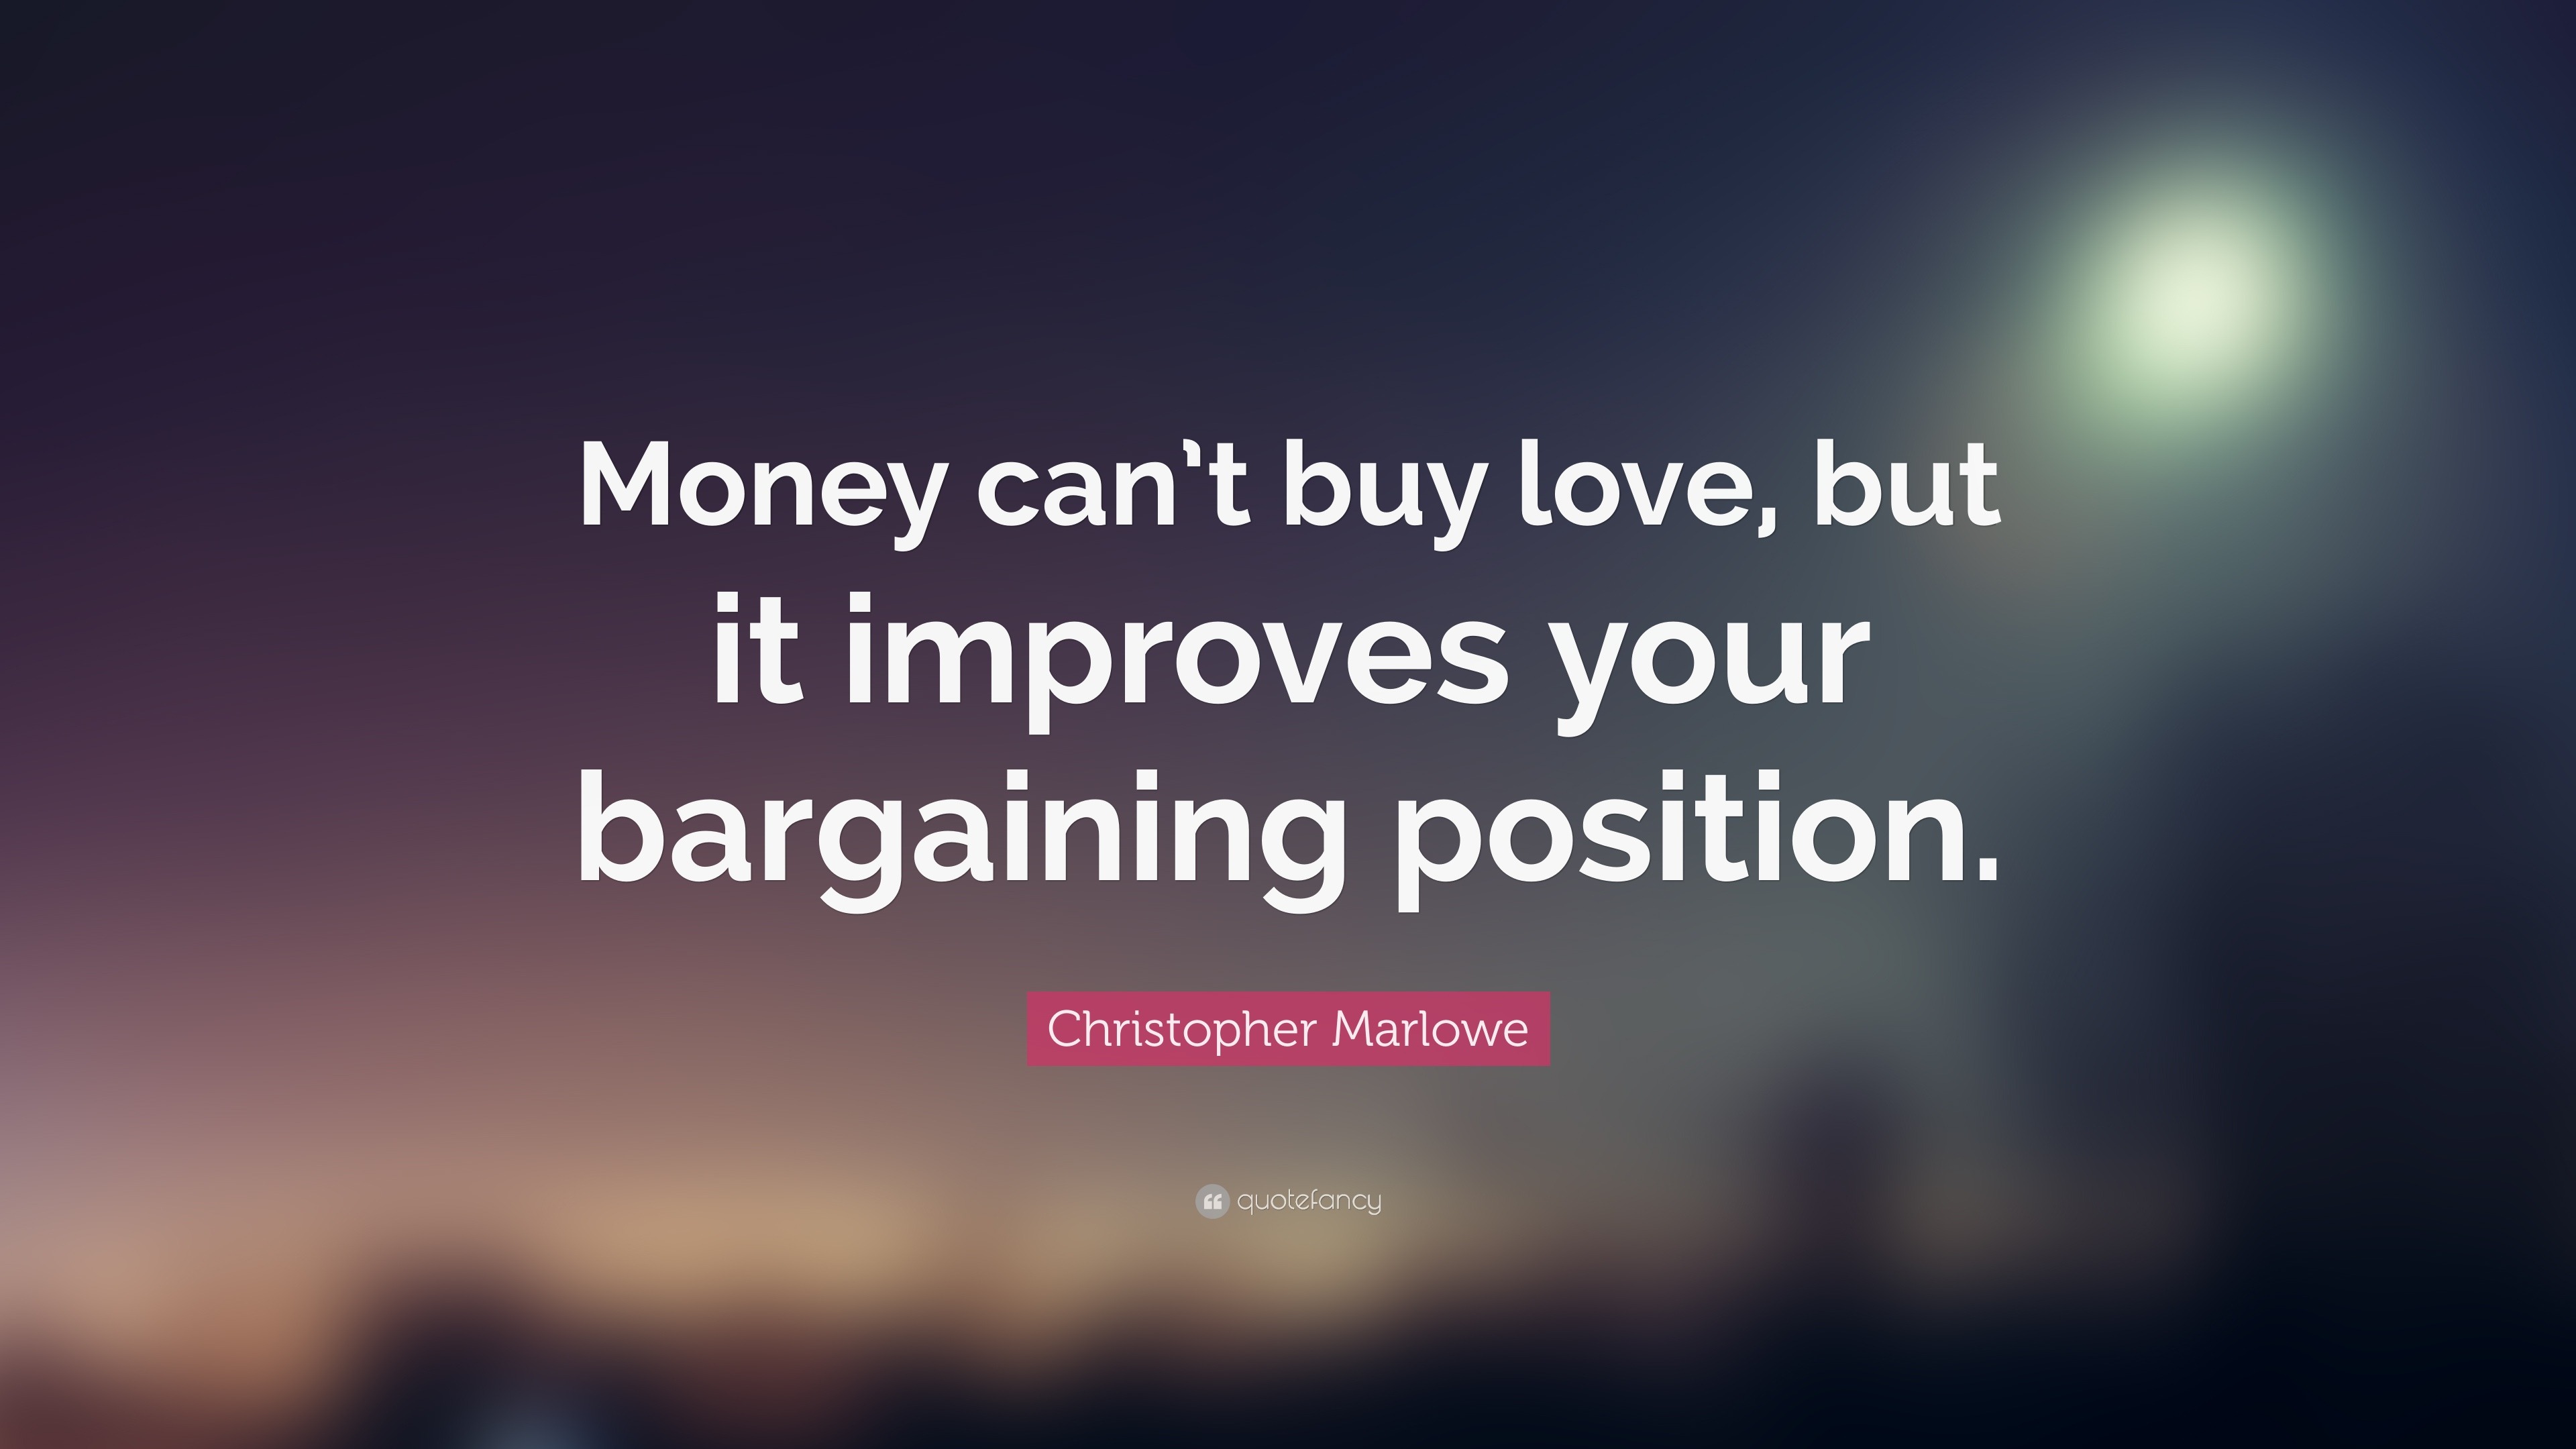 Christopher Marlowe Quote “Money can t love but it improves your